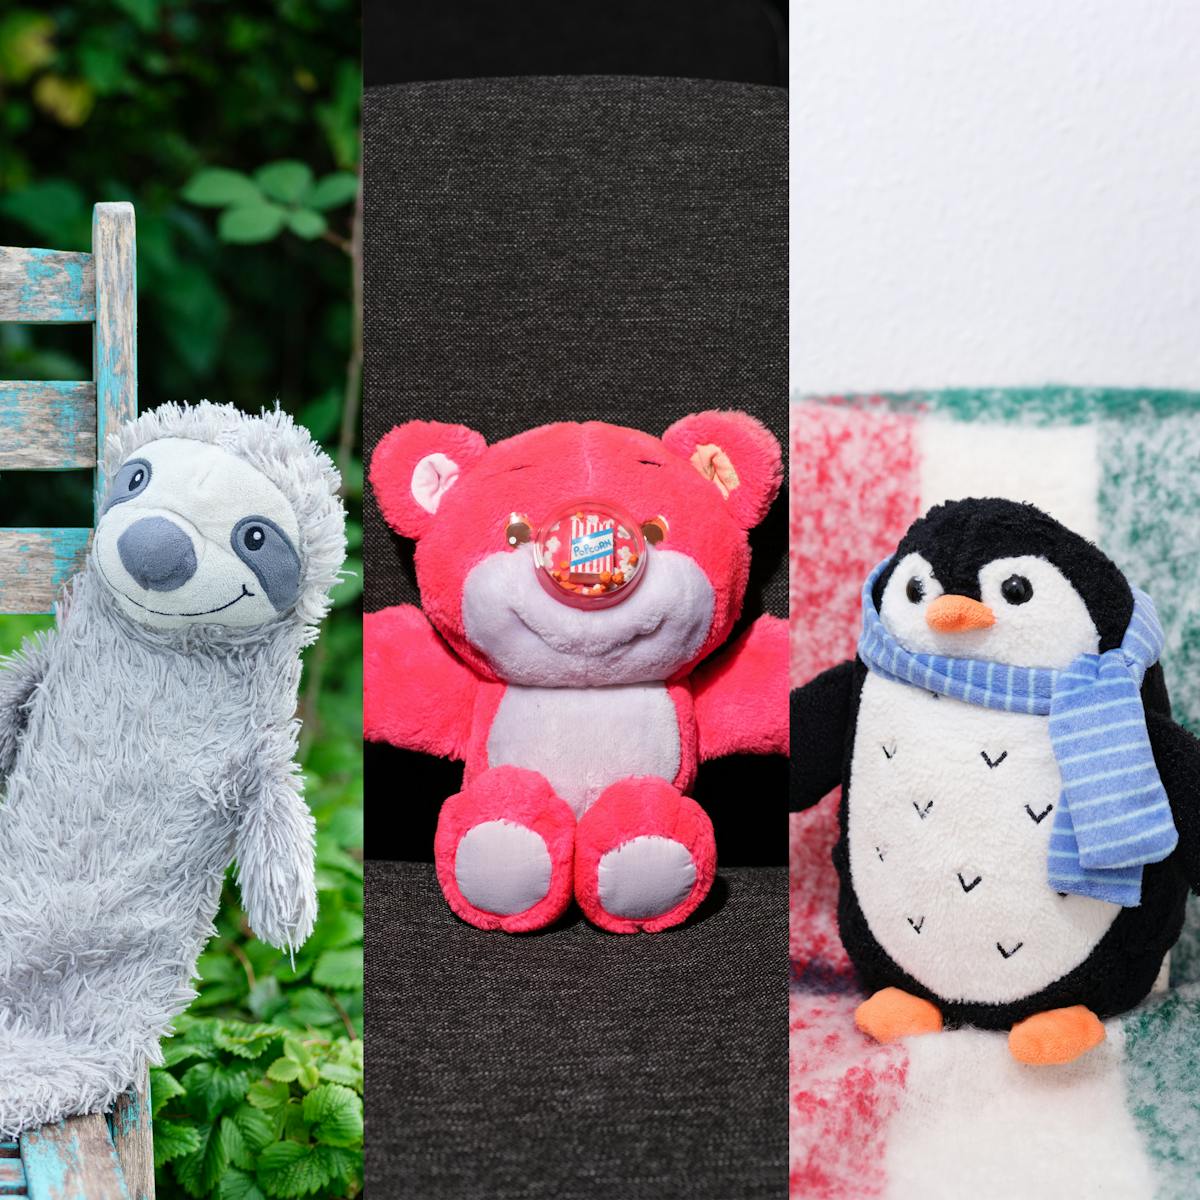 Composite photographic image combining vertical slices of 5 images. Each slice shows a different soft toy, including bears, a sloth, and a pengiun.